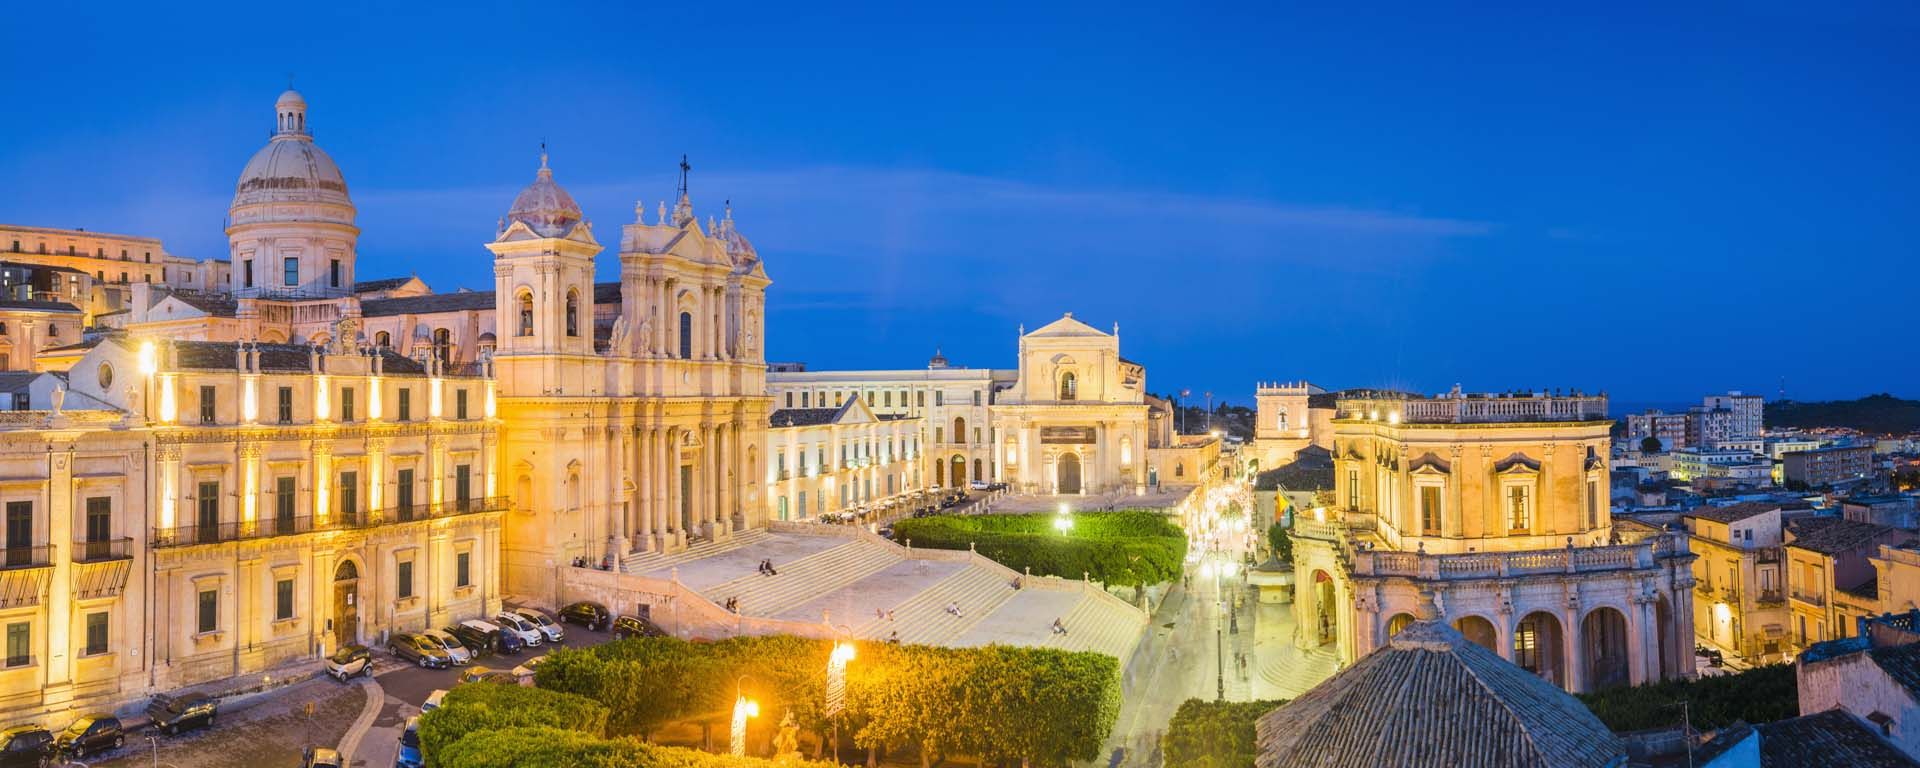 noto-sicily-italy-noto-cathedral-church-of-san-salvatore-and-town-hall-in-piazza-del-municipio-travel-photography-by-freelance-travel-and-destination-photographer-matthew-williams-ellis-0861c7eae6203a2571a5c2f9cdd24fa1.jpg